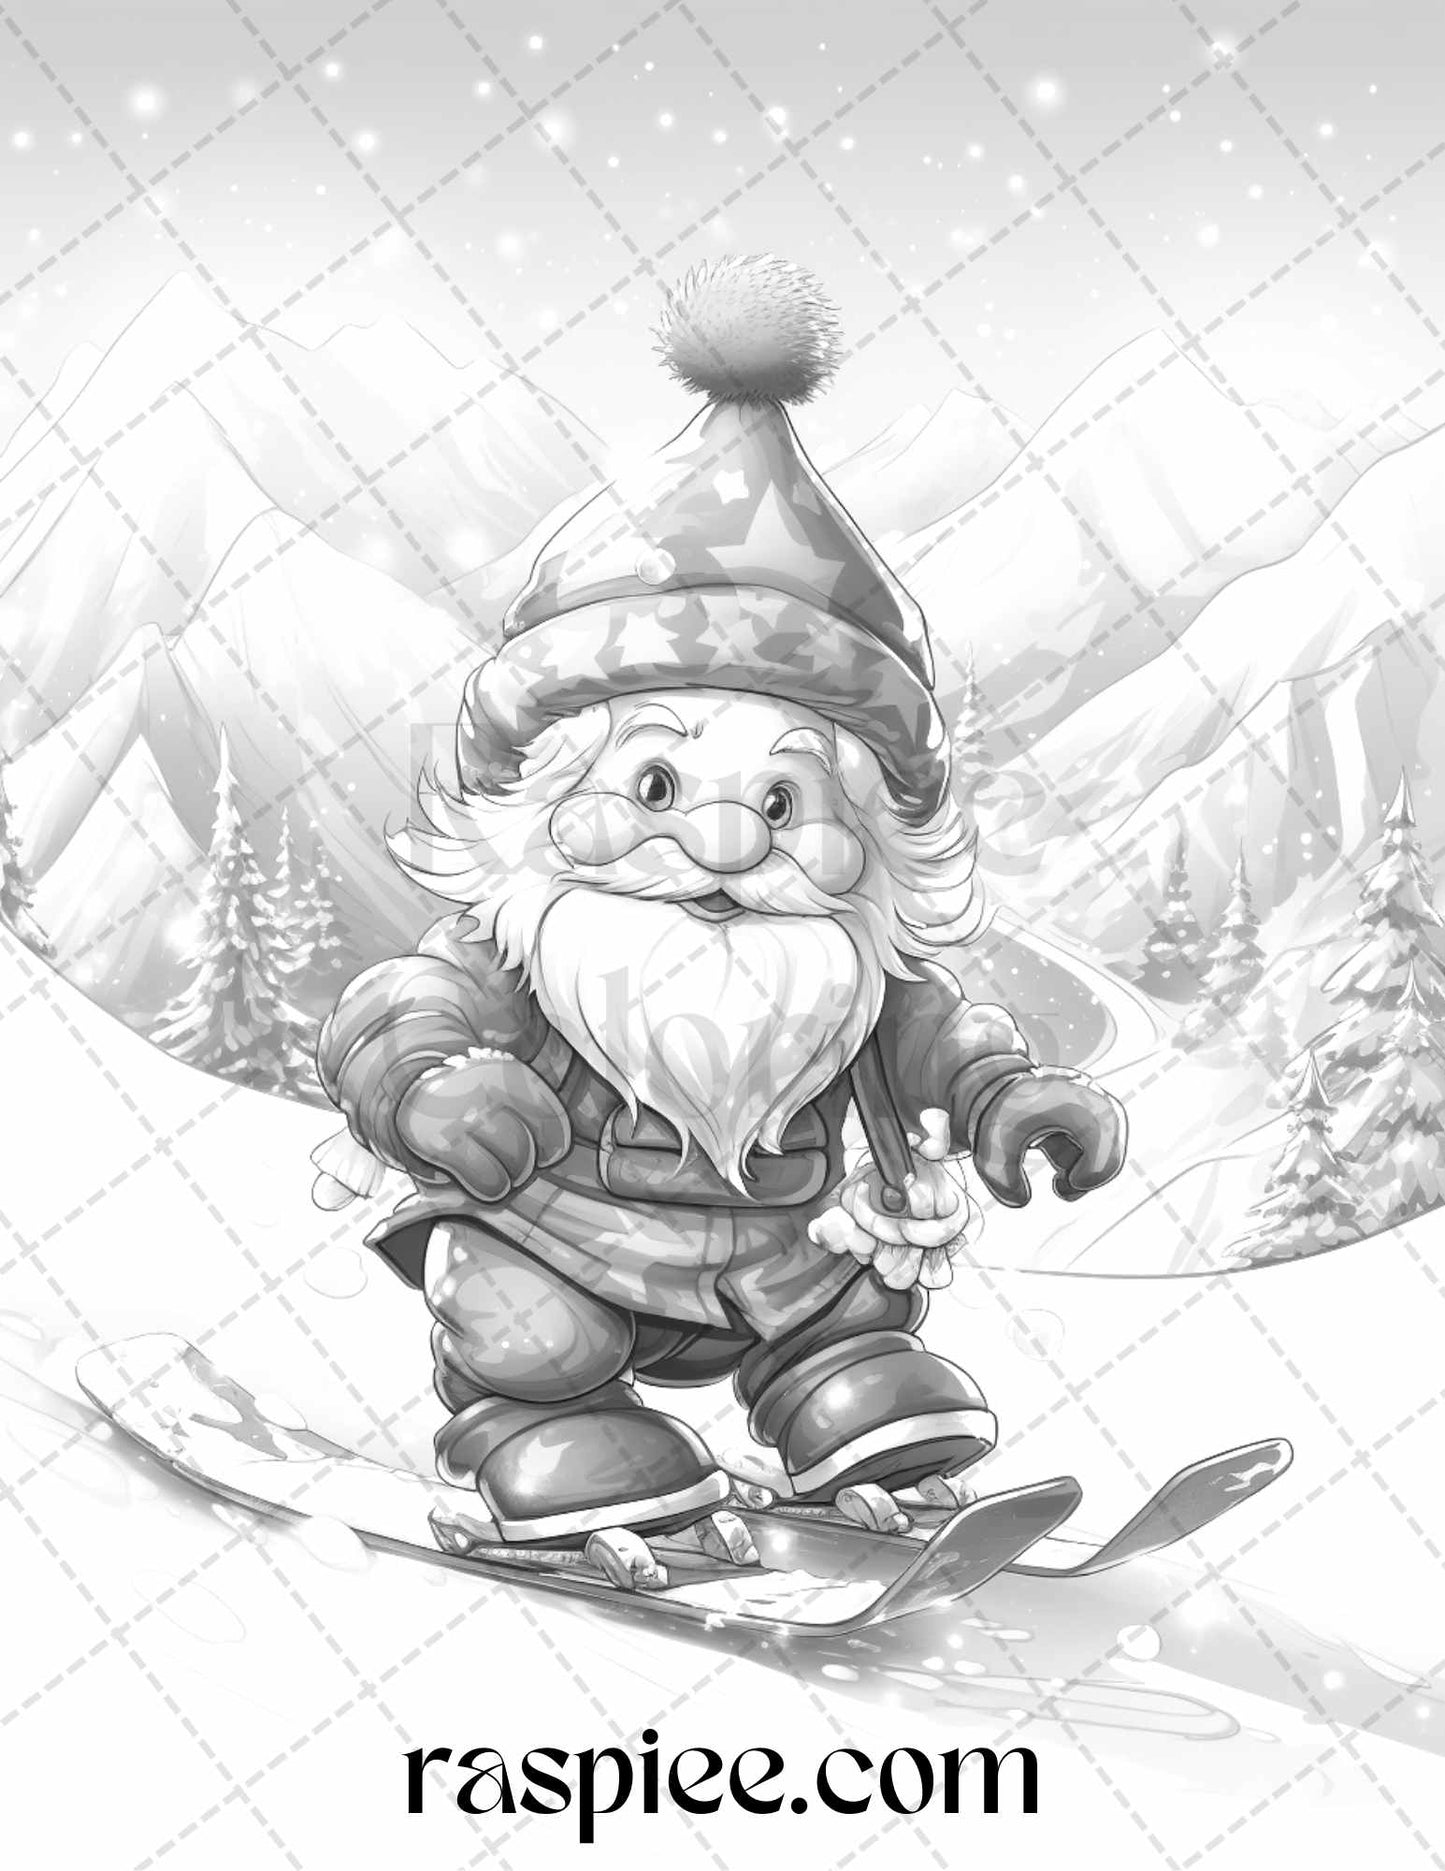 Christmas Gnome Coloring Page, Printable Adult and Kids Coloring, Seasonal Coloring Activity, Winter Coloring Pages, Home Entertainment Activity, Digital Downloadable Coloring, Christmas Coloring Pages, Christmas Coloring Sheets, Xmas Coloring Pages, Holiday Coloring Pages, Gnomes Coloring Pages